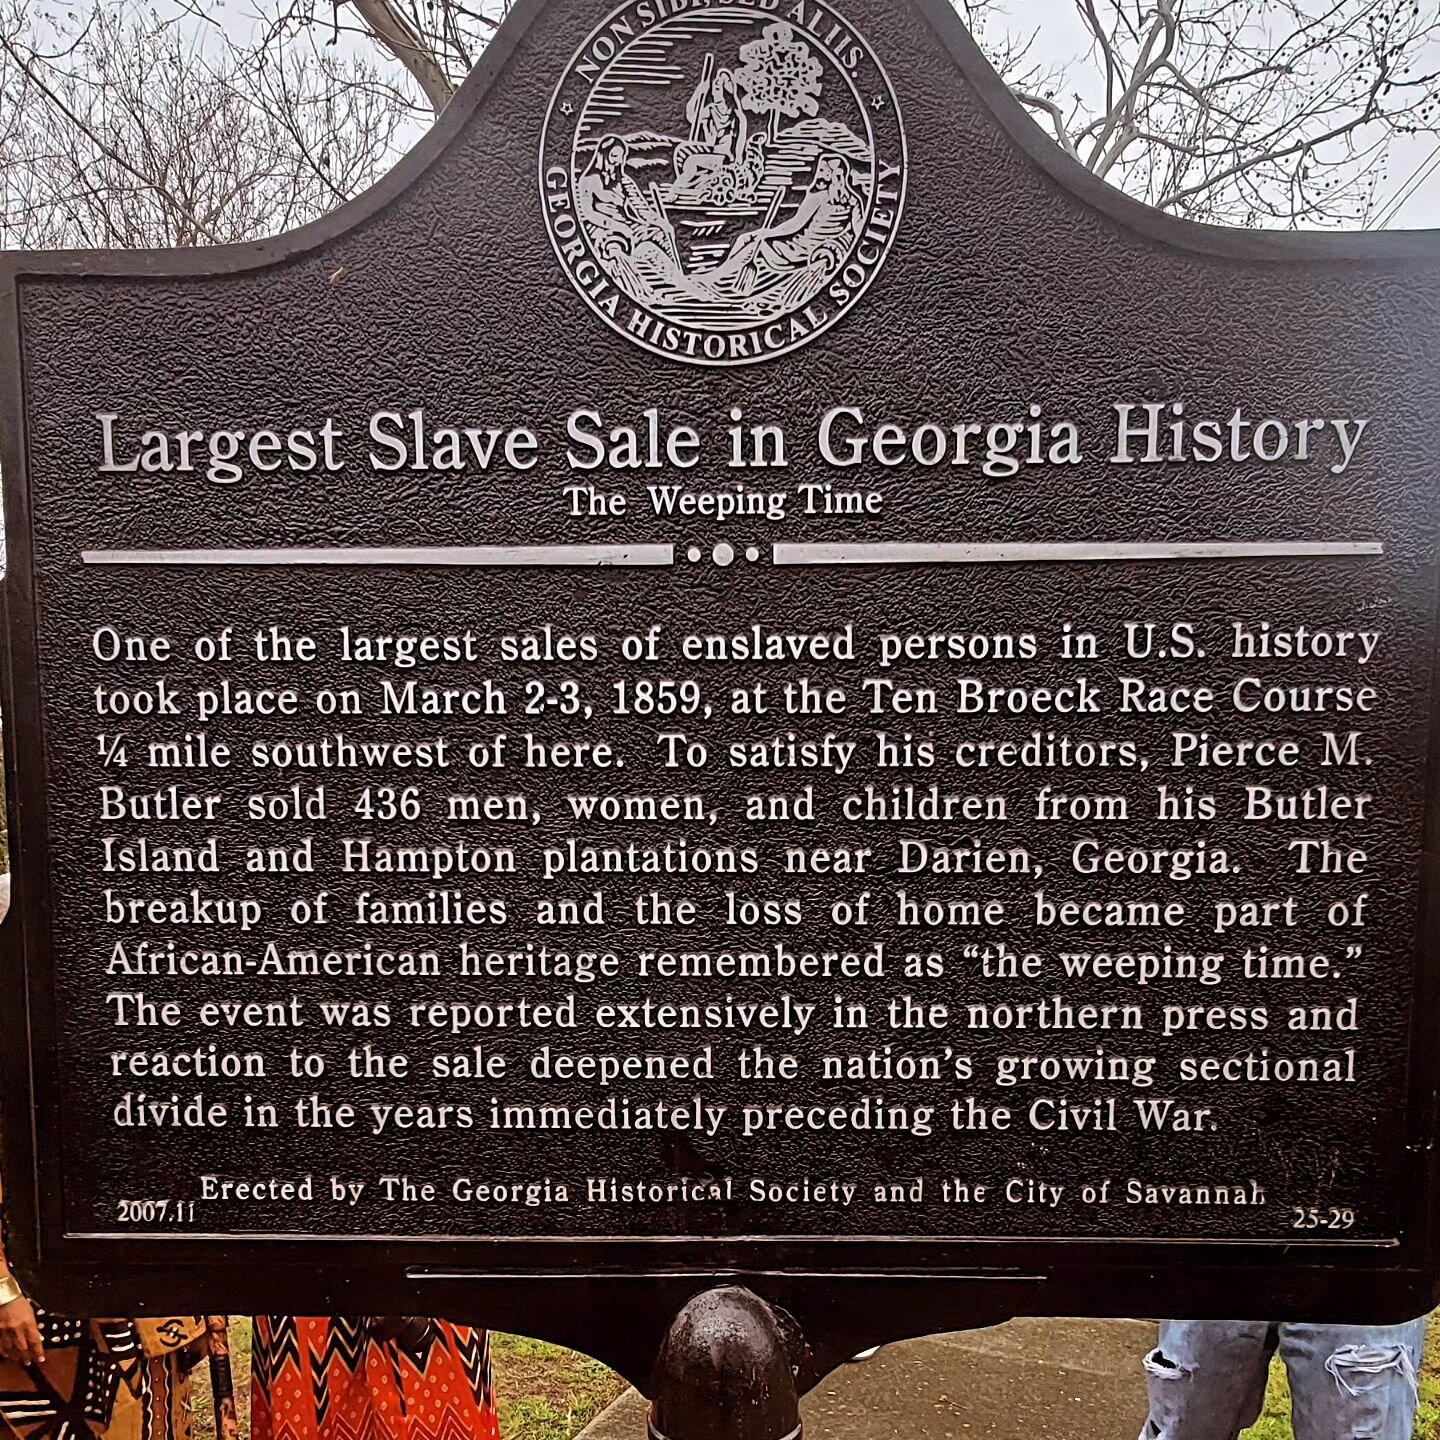 On March 2-3, 1859, in West #Savannah, 436 enslaved African American men, women, and children were presented for sale under torrential rain. The historical account says the skies opened, and even God &ldquo;wept.&rdquo;

Today, 165 years later, we ag